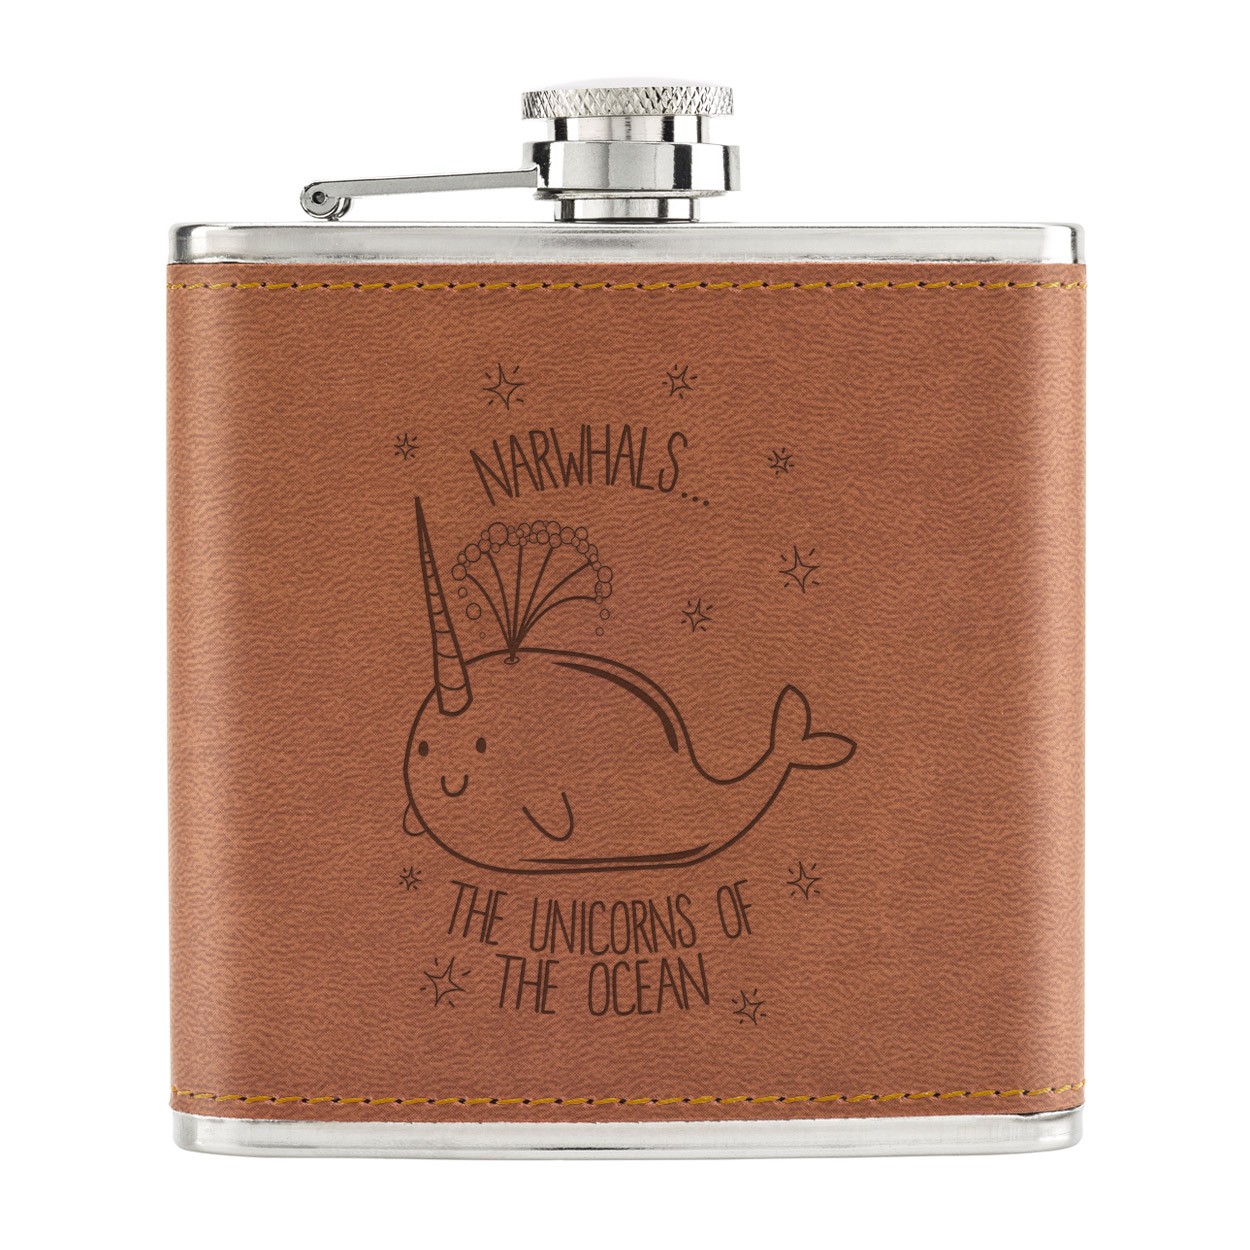 Narwhals The Unicorns Of The Ocean 6oz PU Leather Hip Flask Tan